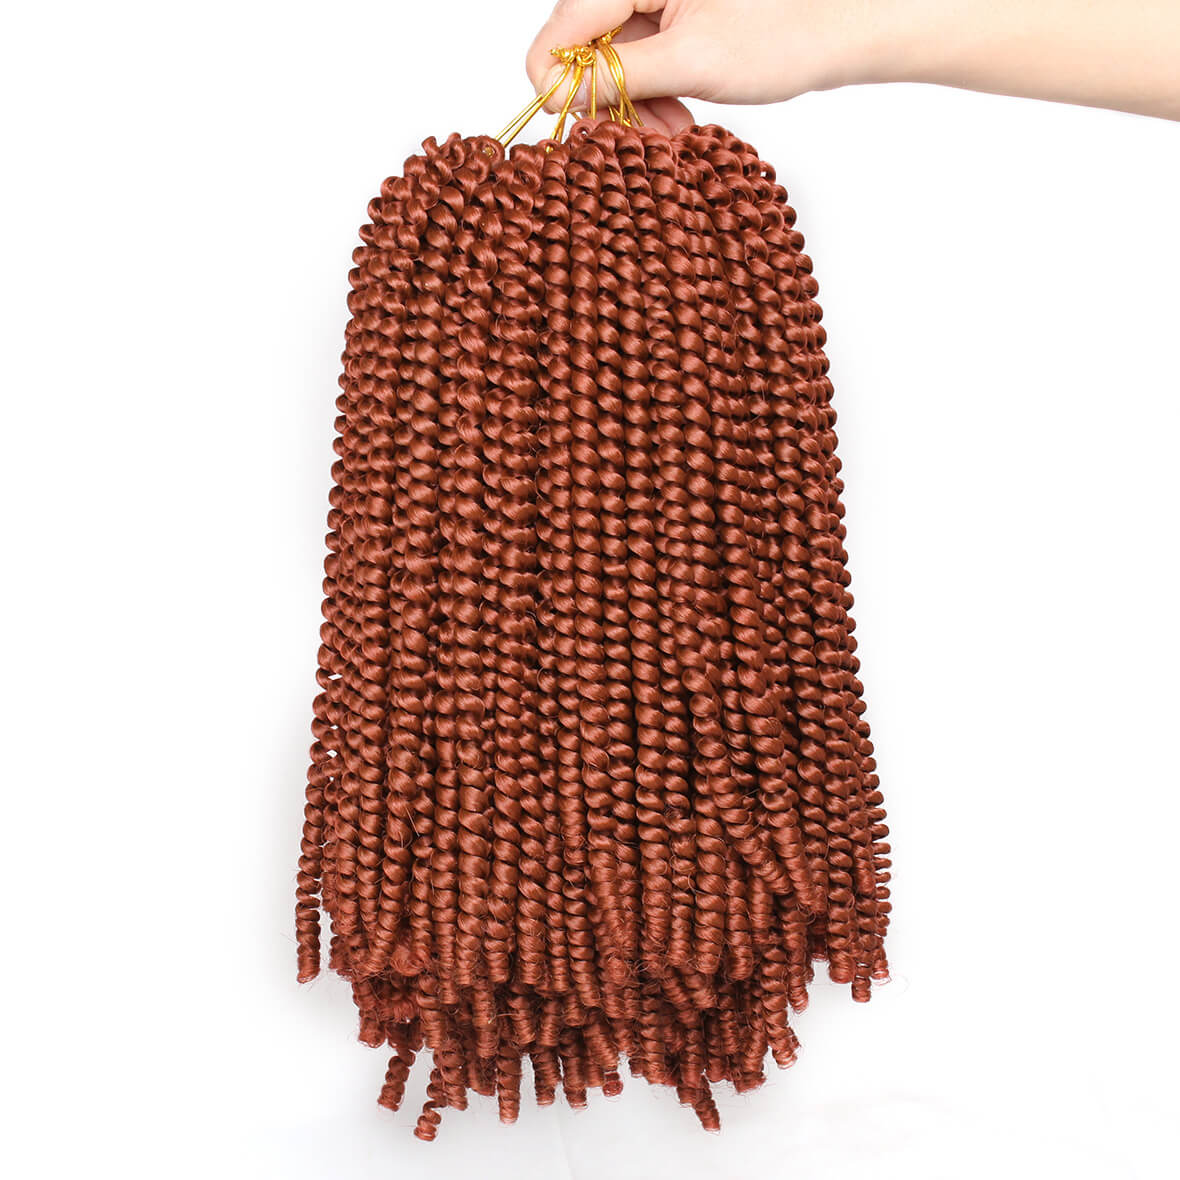 Xtrend 18 Inch Copper Red New Faux Locks Braids Hair Fashion Soft Locks Hair Synthetic Hair Extend Pre-Looped New Loc Braiding Hair 21Strands Faux Locks Curly Crochet Hair For Women 350# 18 Inch (Pack of 2) 350#